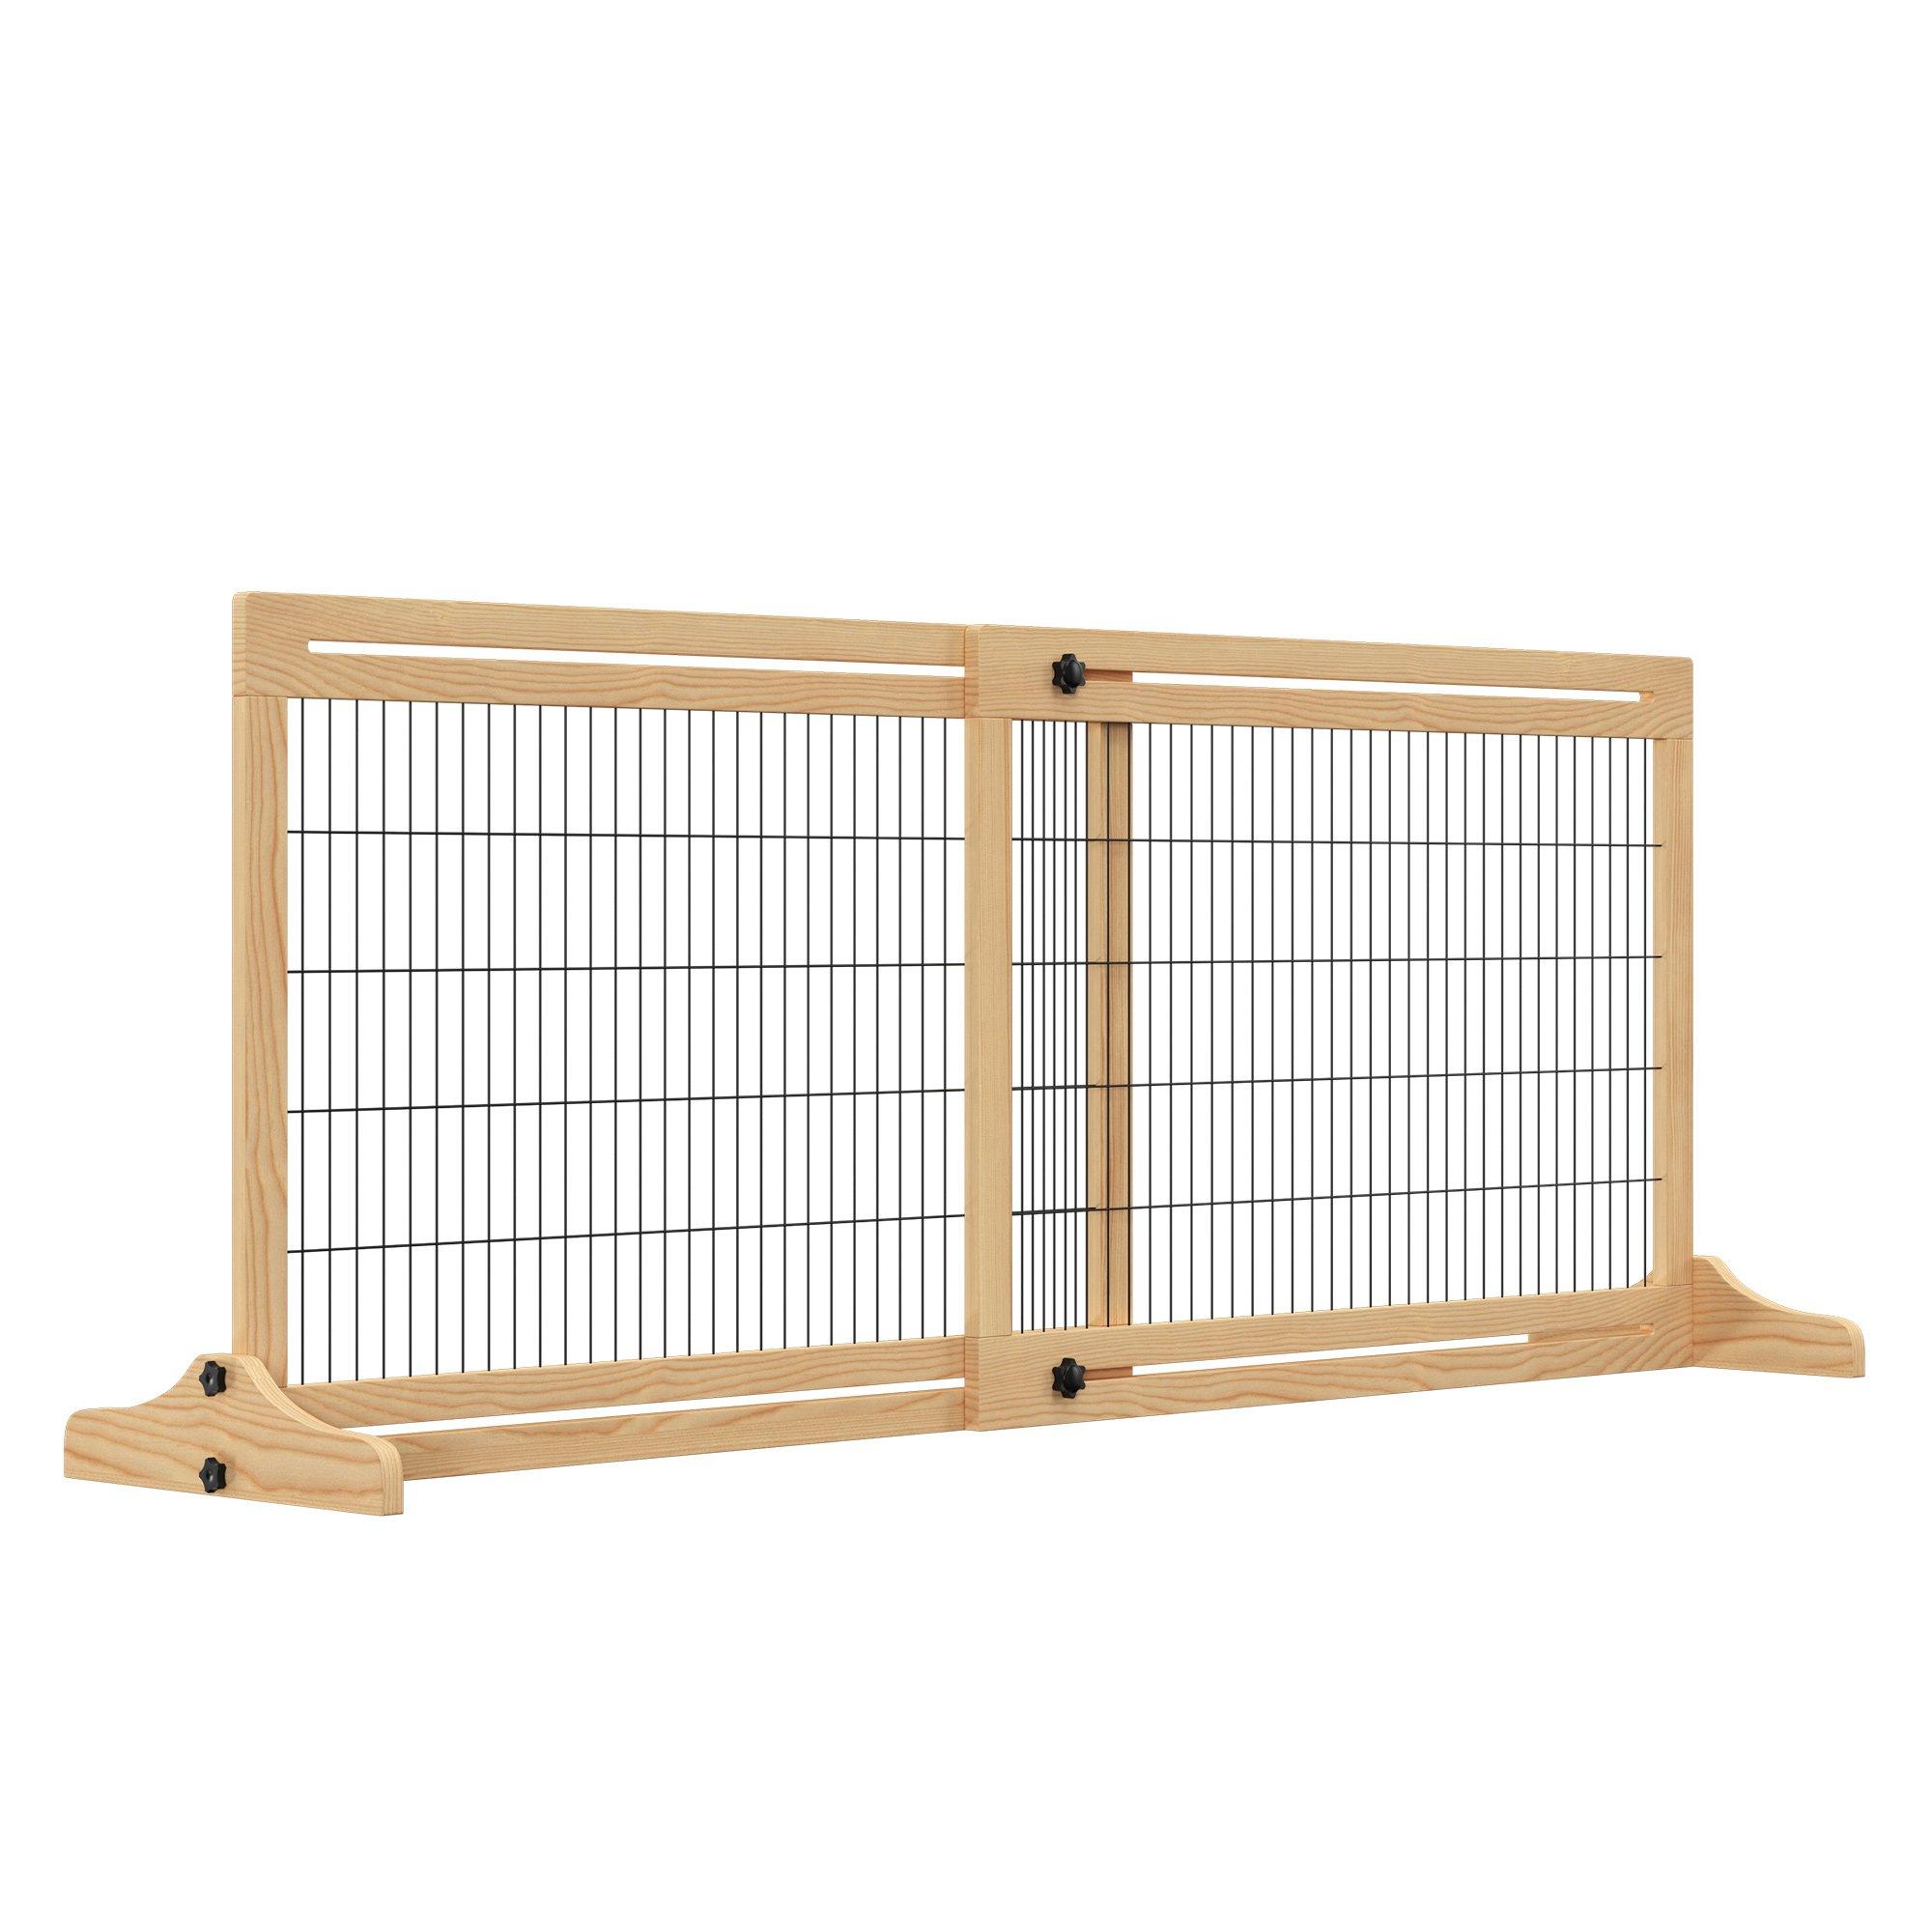 183cm Wide Adjustable Wooden Pet Gate with 2 Panels for S, M Dogs, Doorway